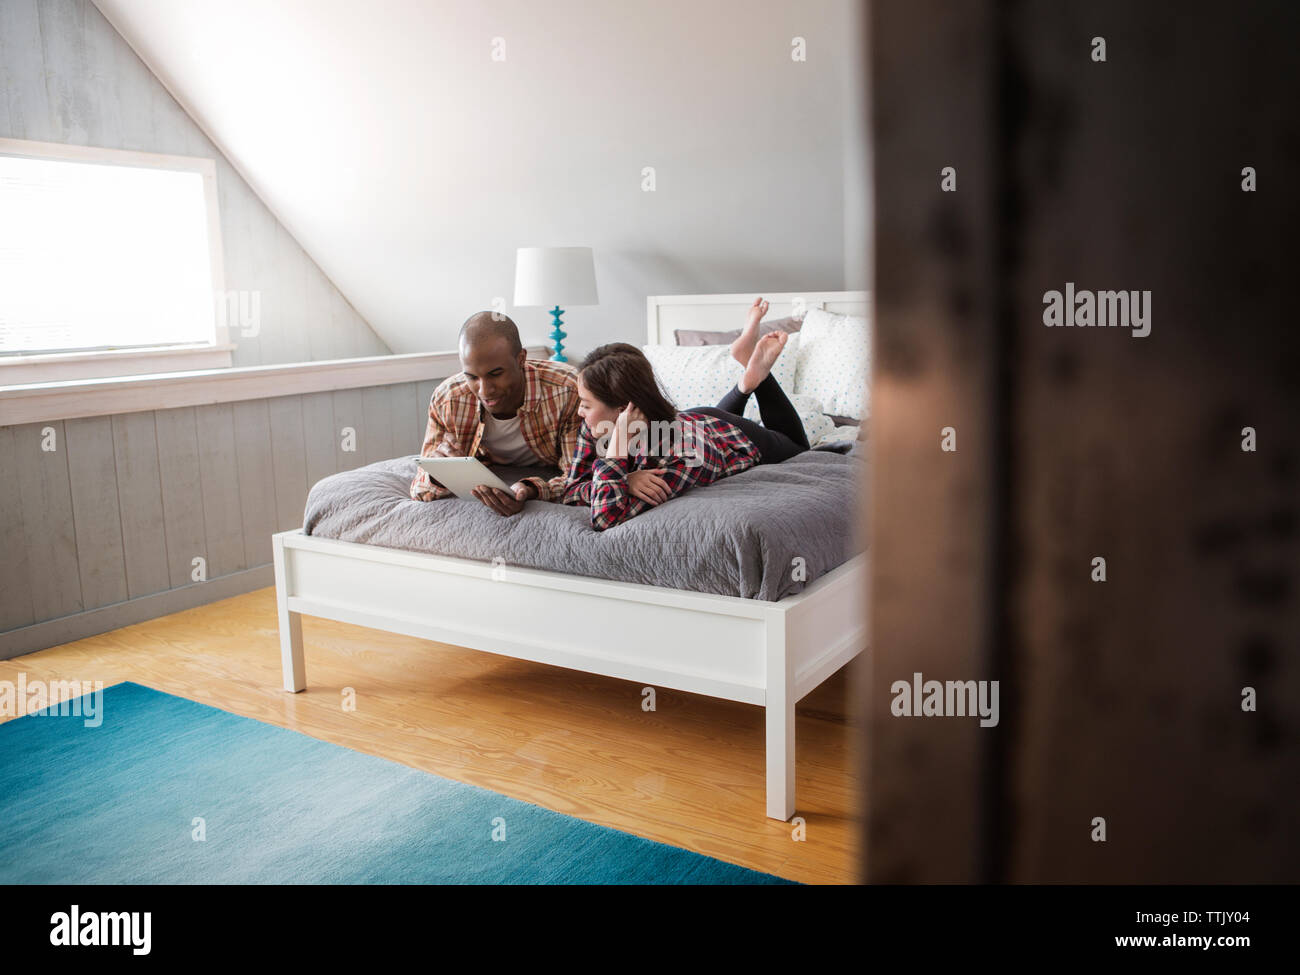 Couple using tablet computer while lying on bed at home Stock Photo